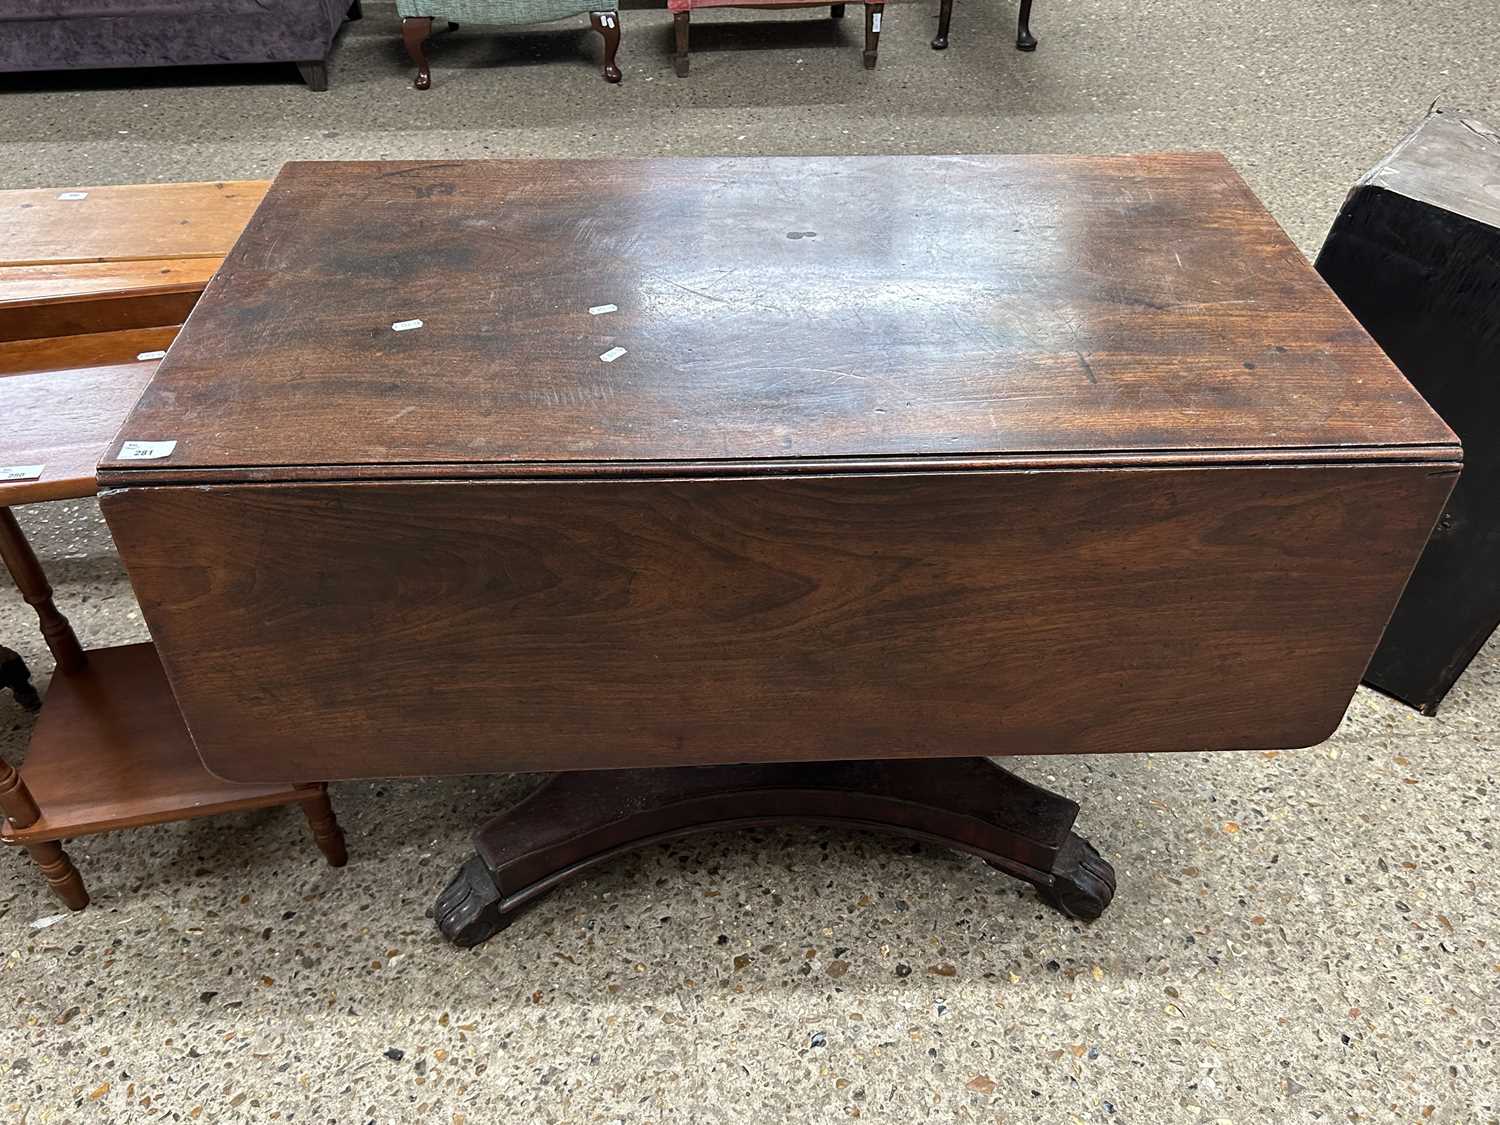 19th Century mahogany pedestal Pembroke table with platform base and carved scrolled legs